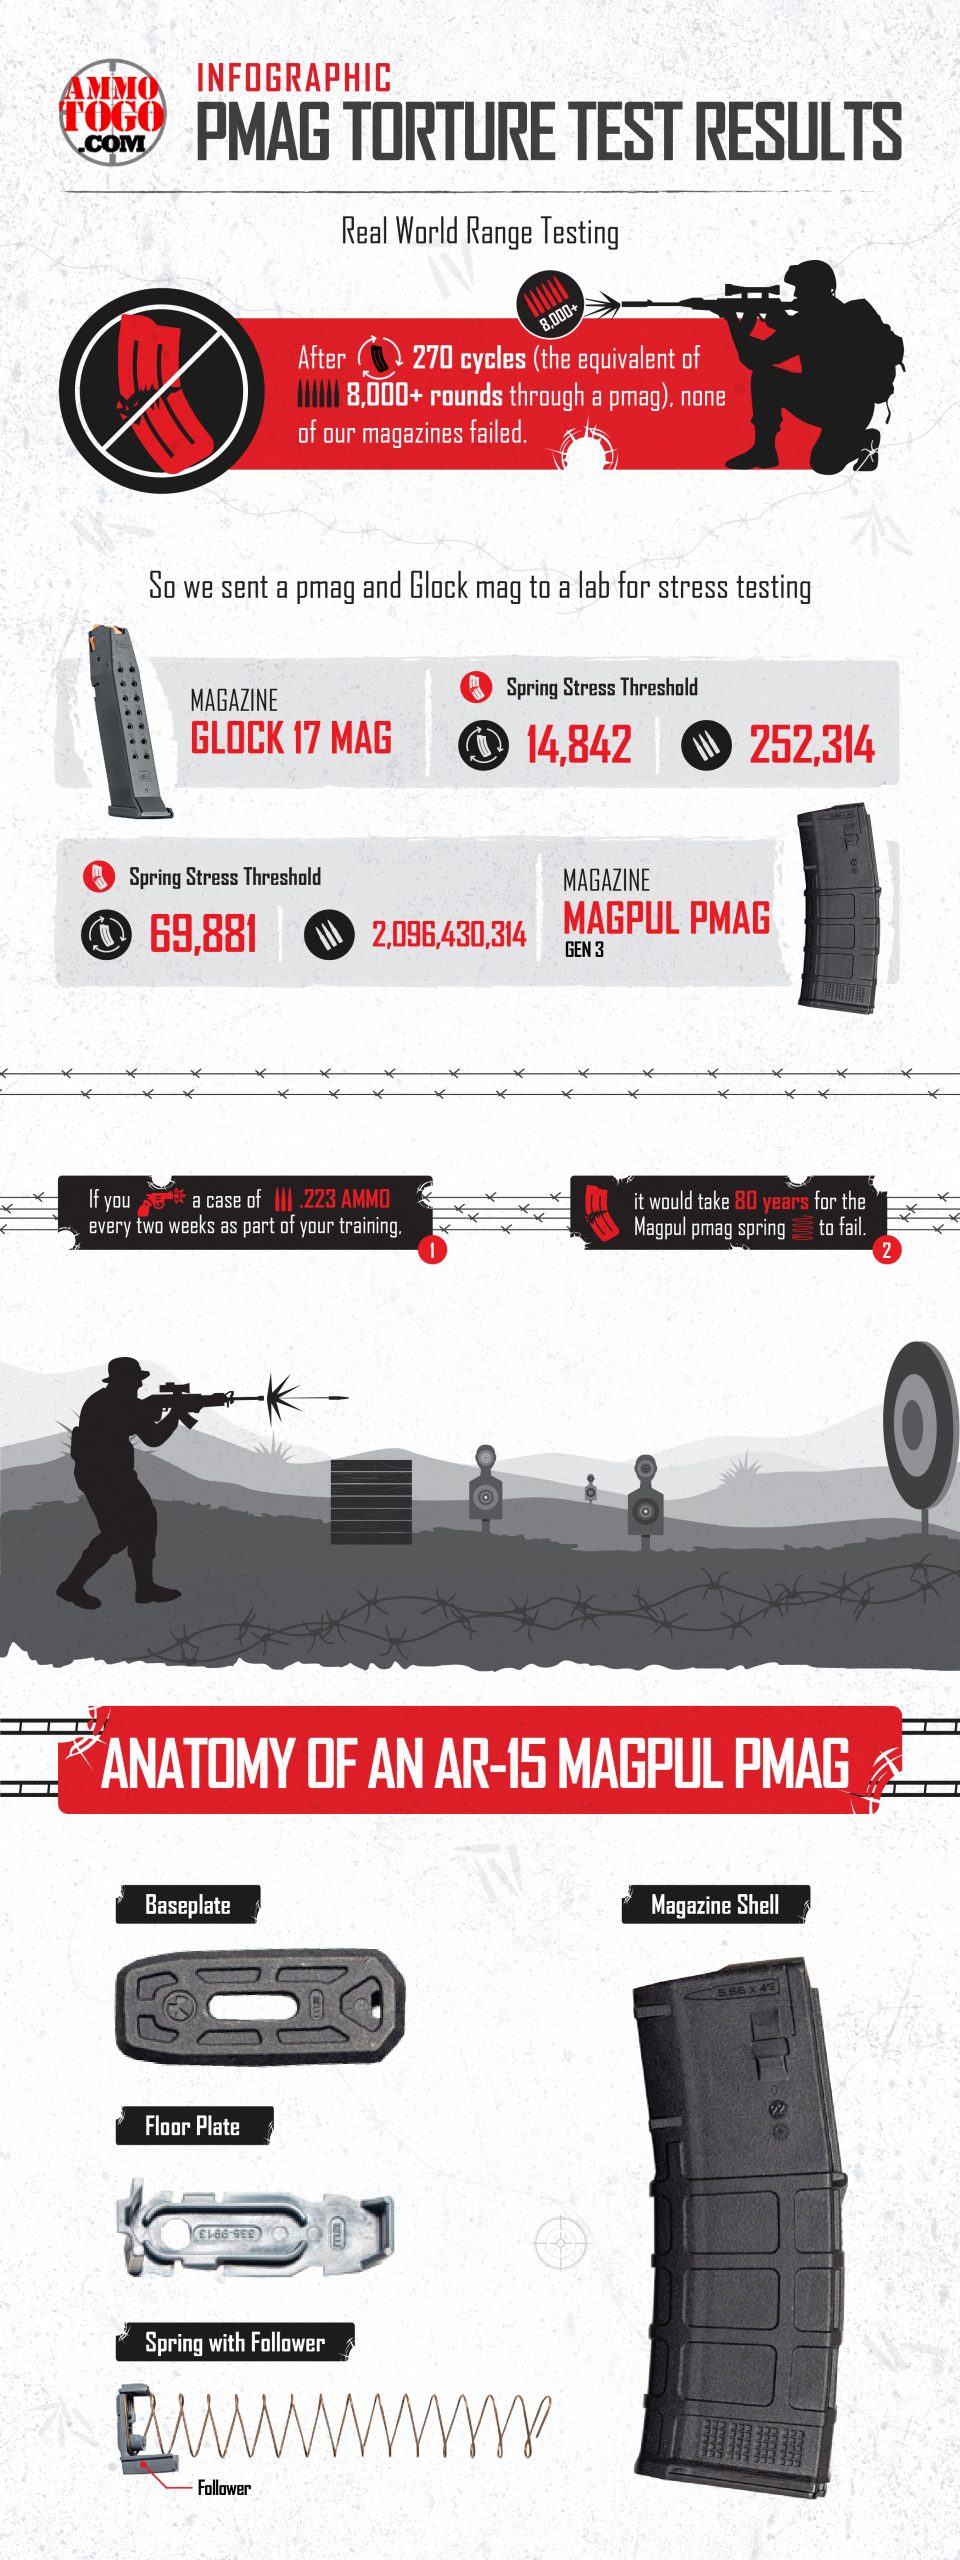 Infographic: PMAG Torture Test Results